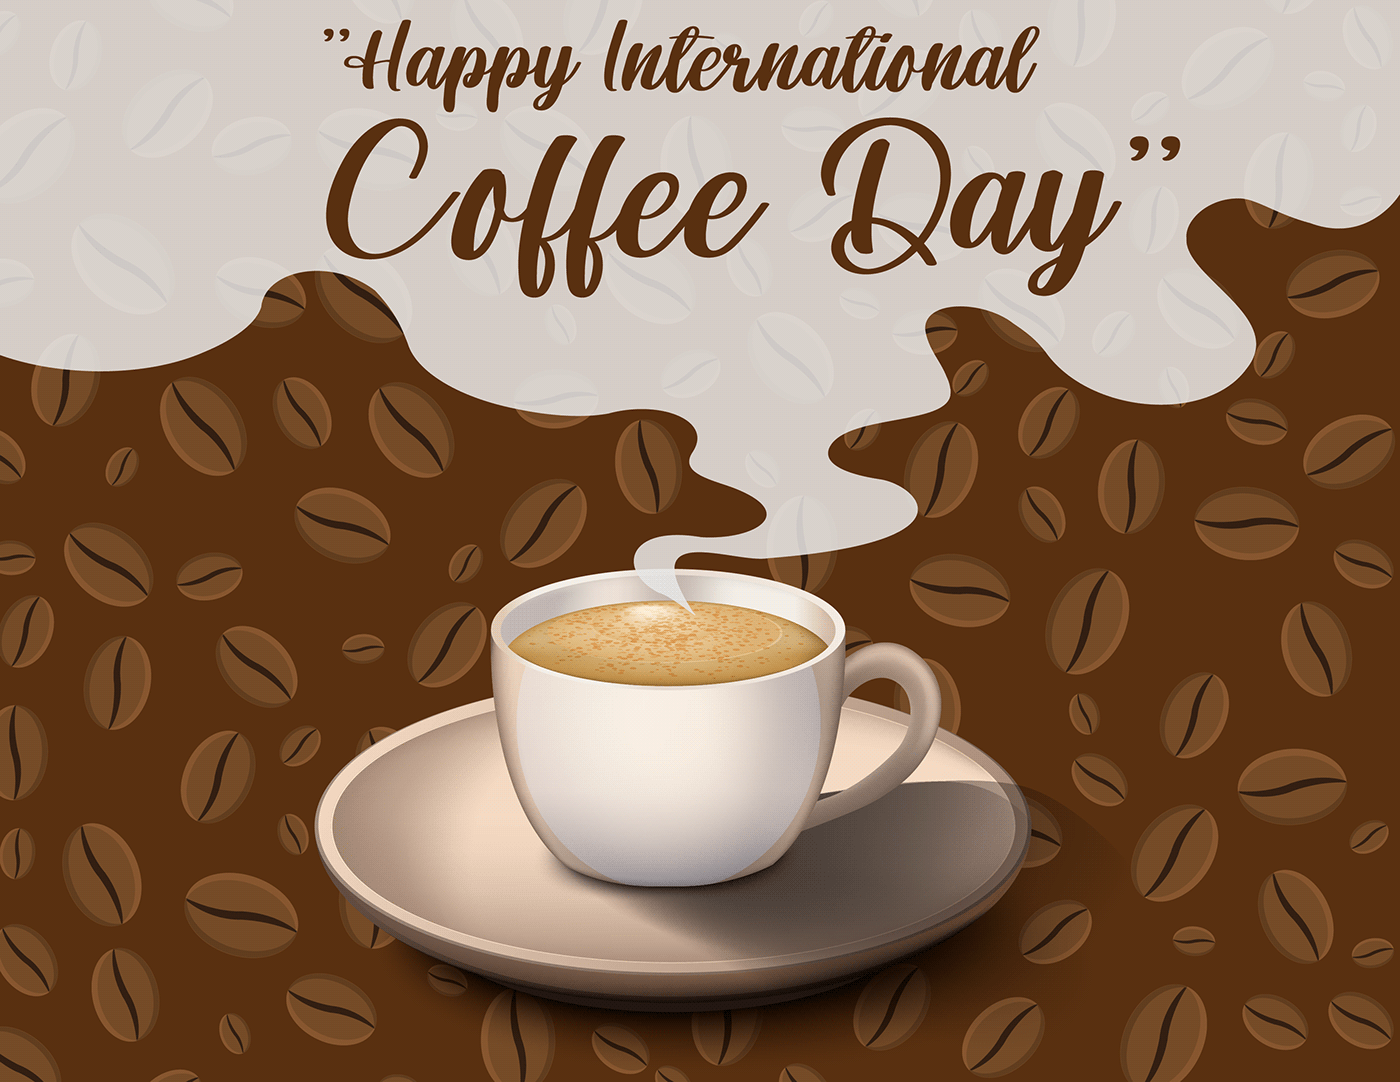 Coffee coffee day coffee logo coffee shop coffe cup coffee cup design coffee banner coffee pattern  Happy Coffee happy coffee day